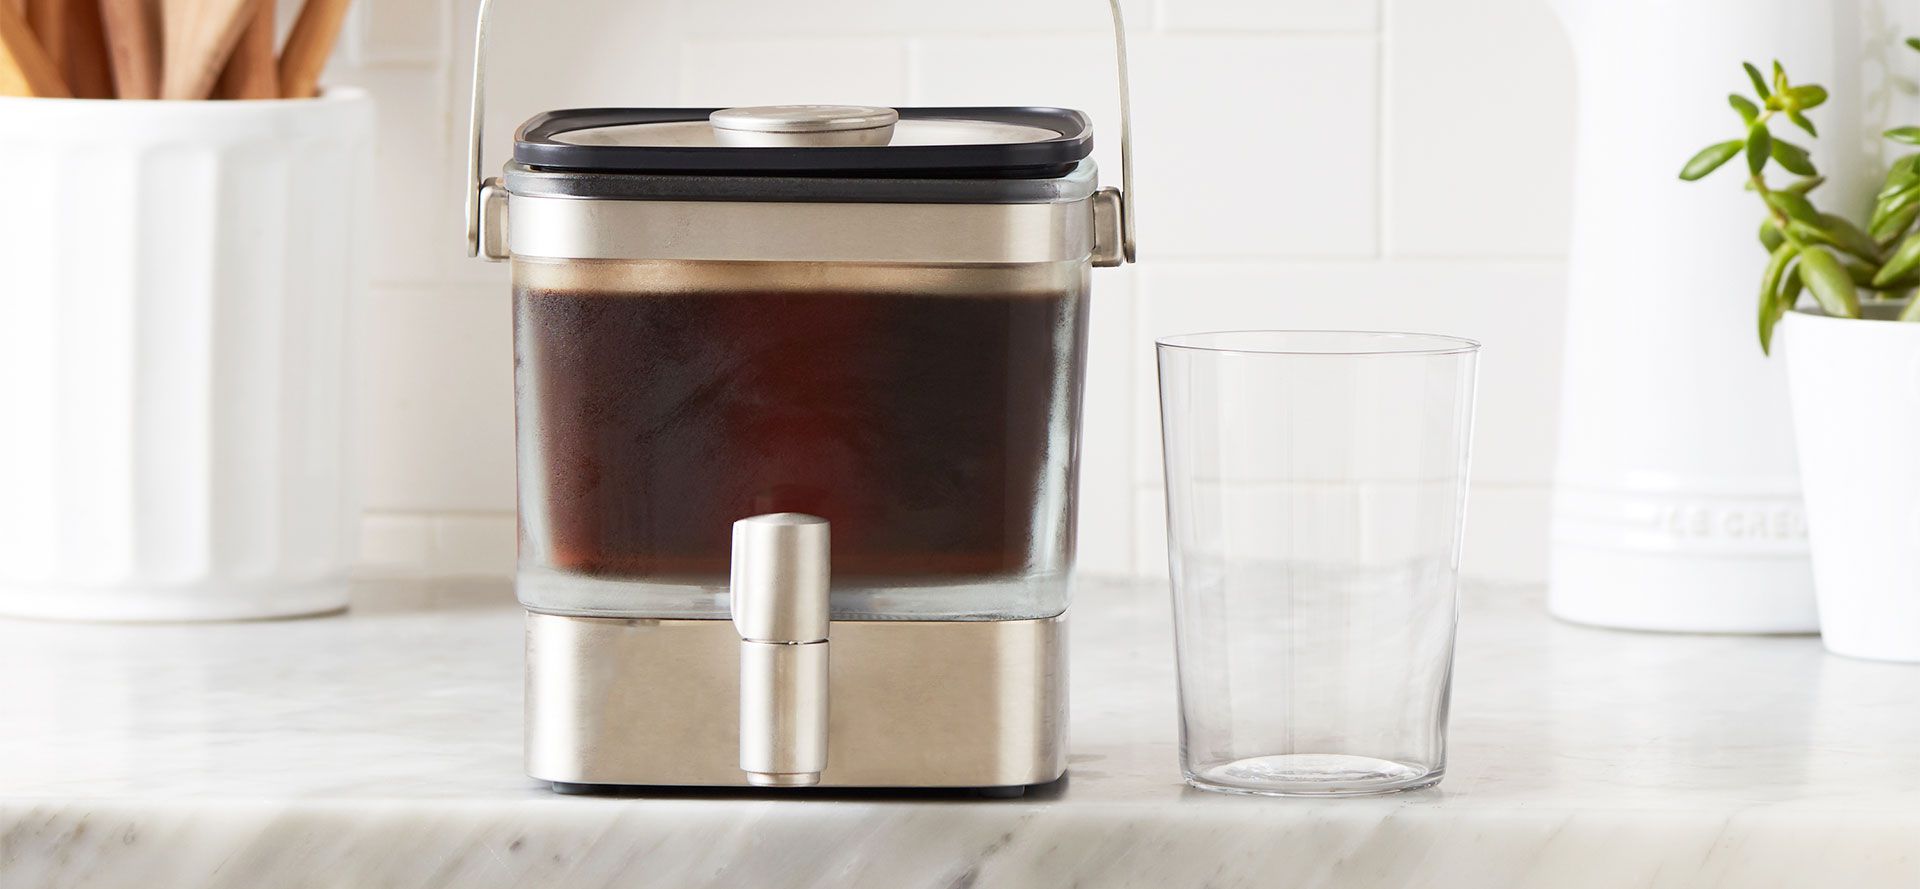 Cold Brew Maker For Coffee.